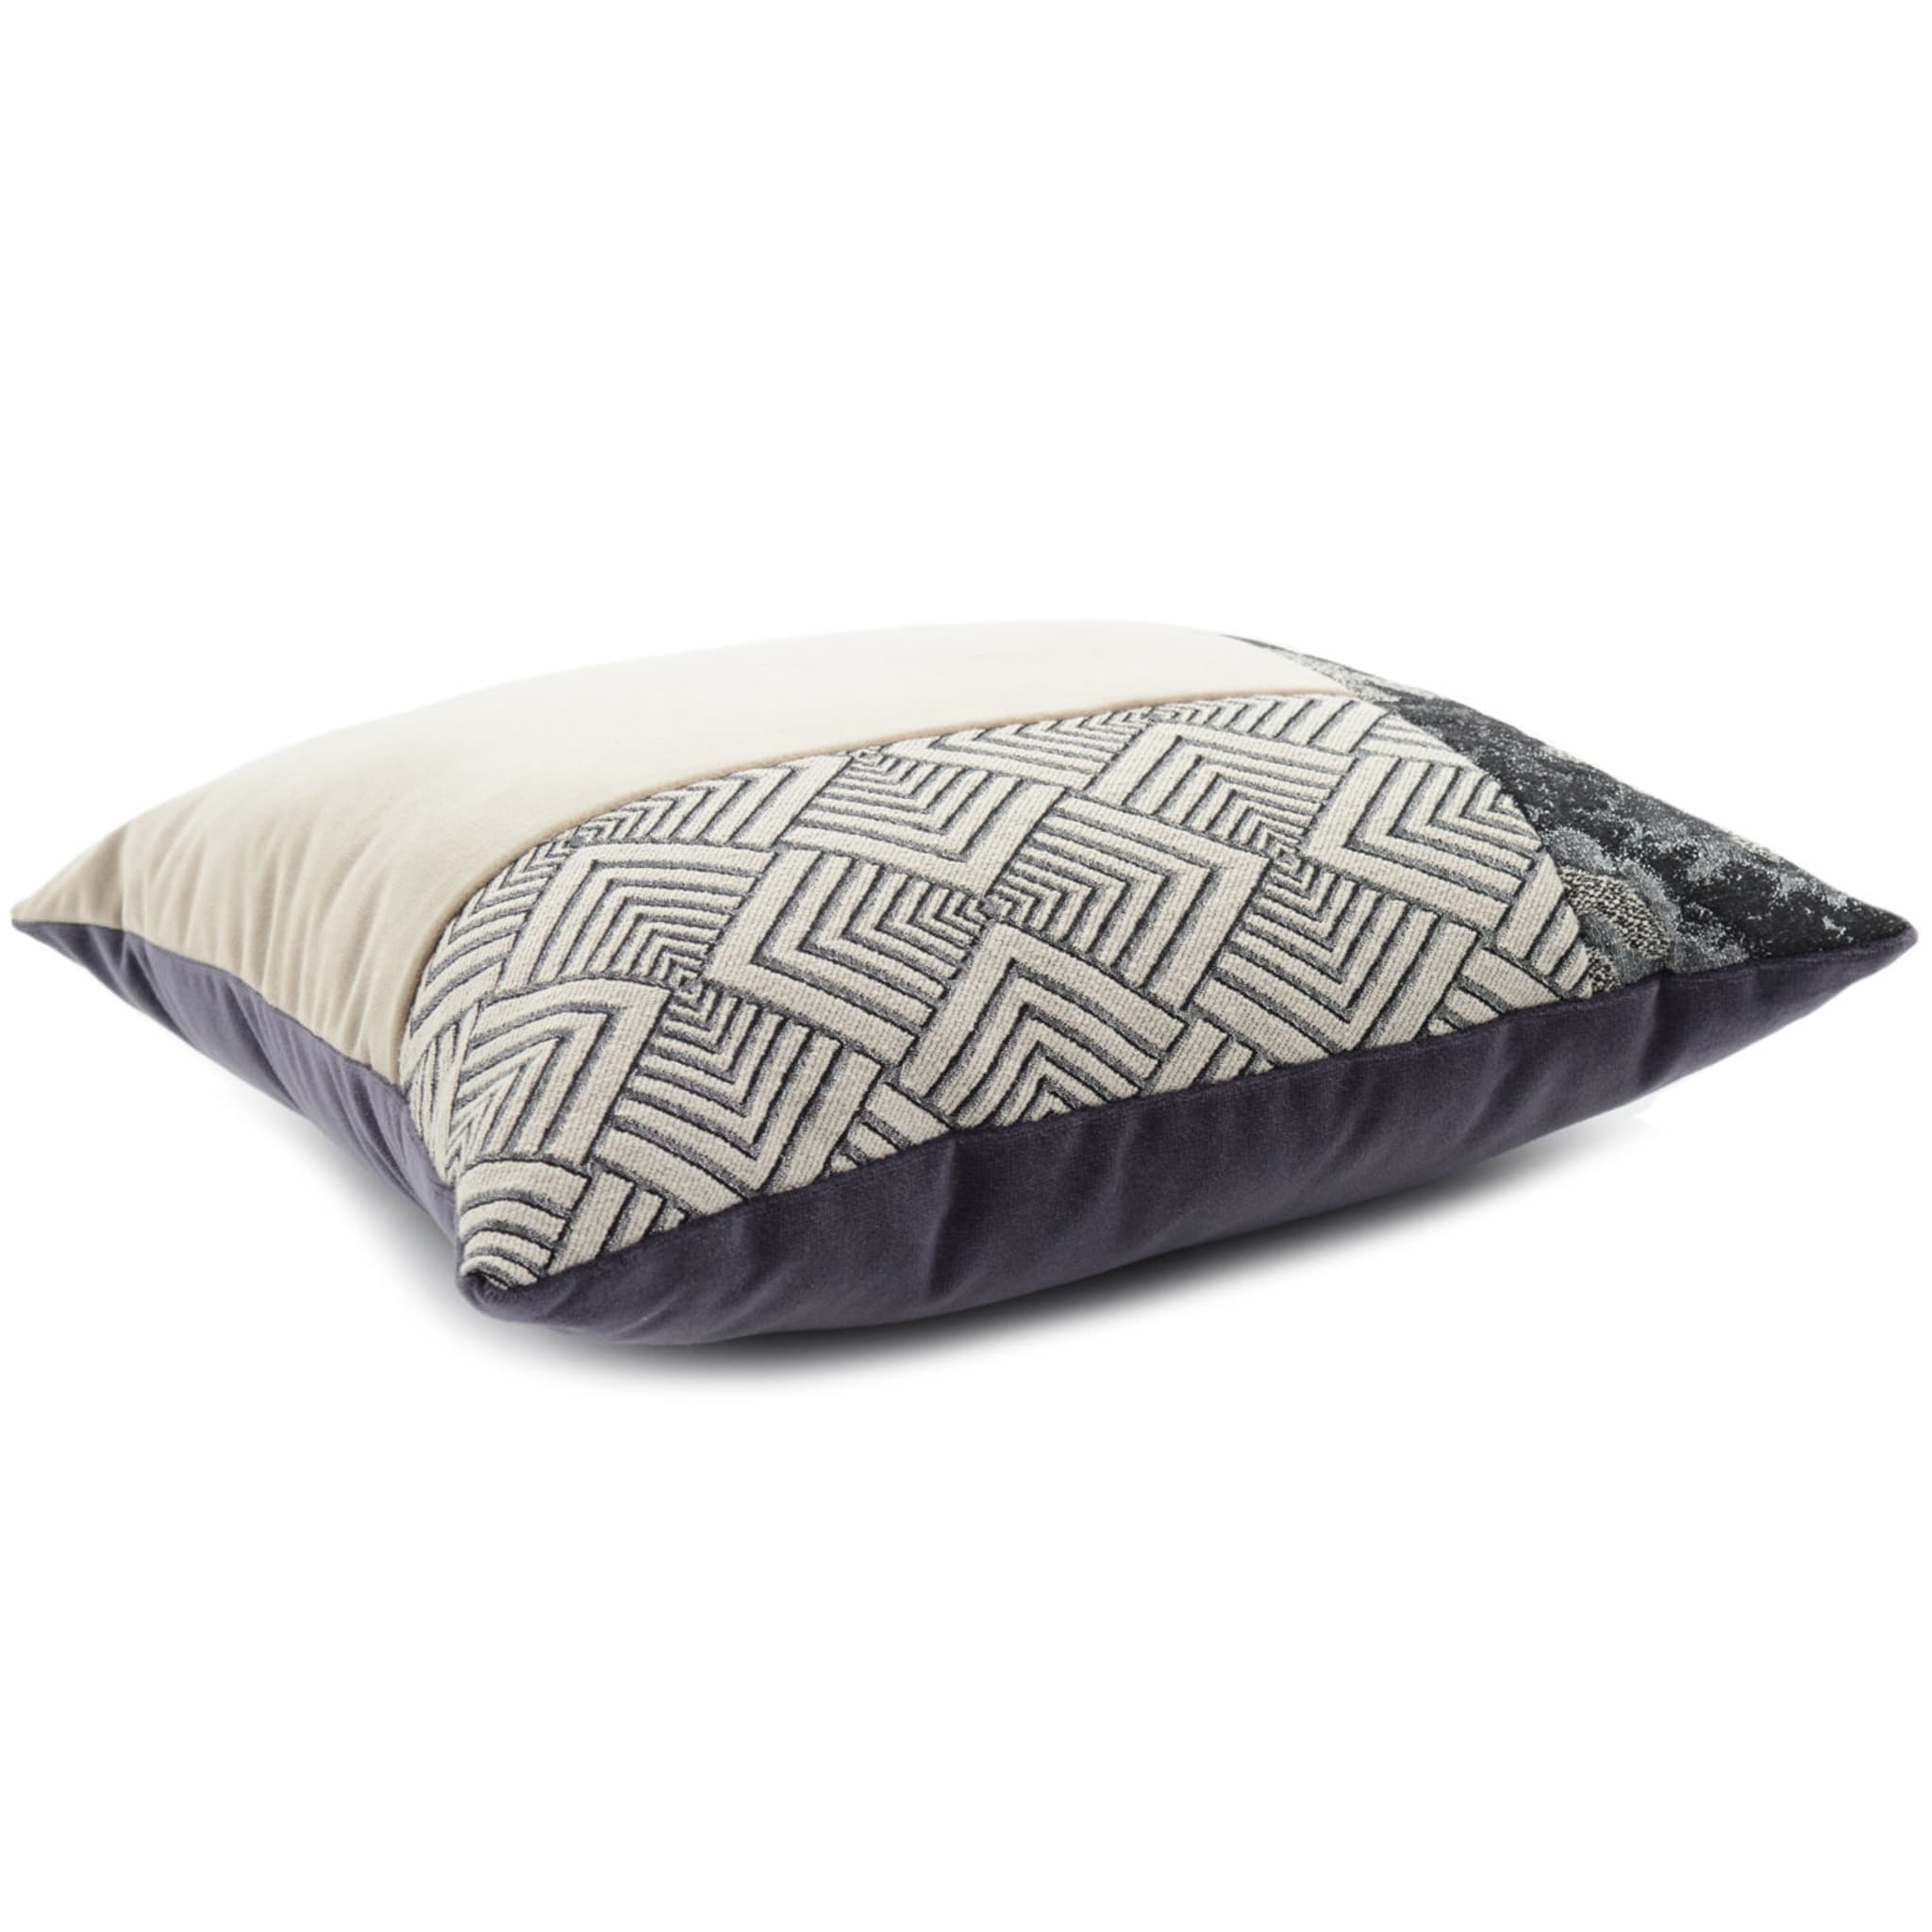 Beige Inlay Carré-T Cushion - Alternative view 2